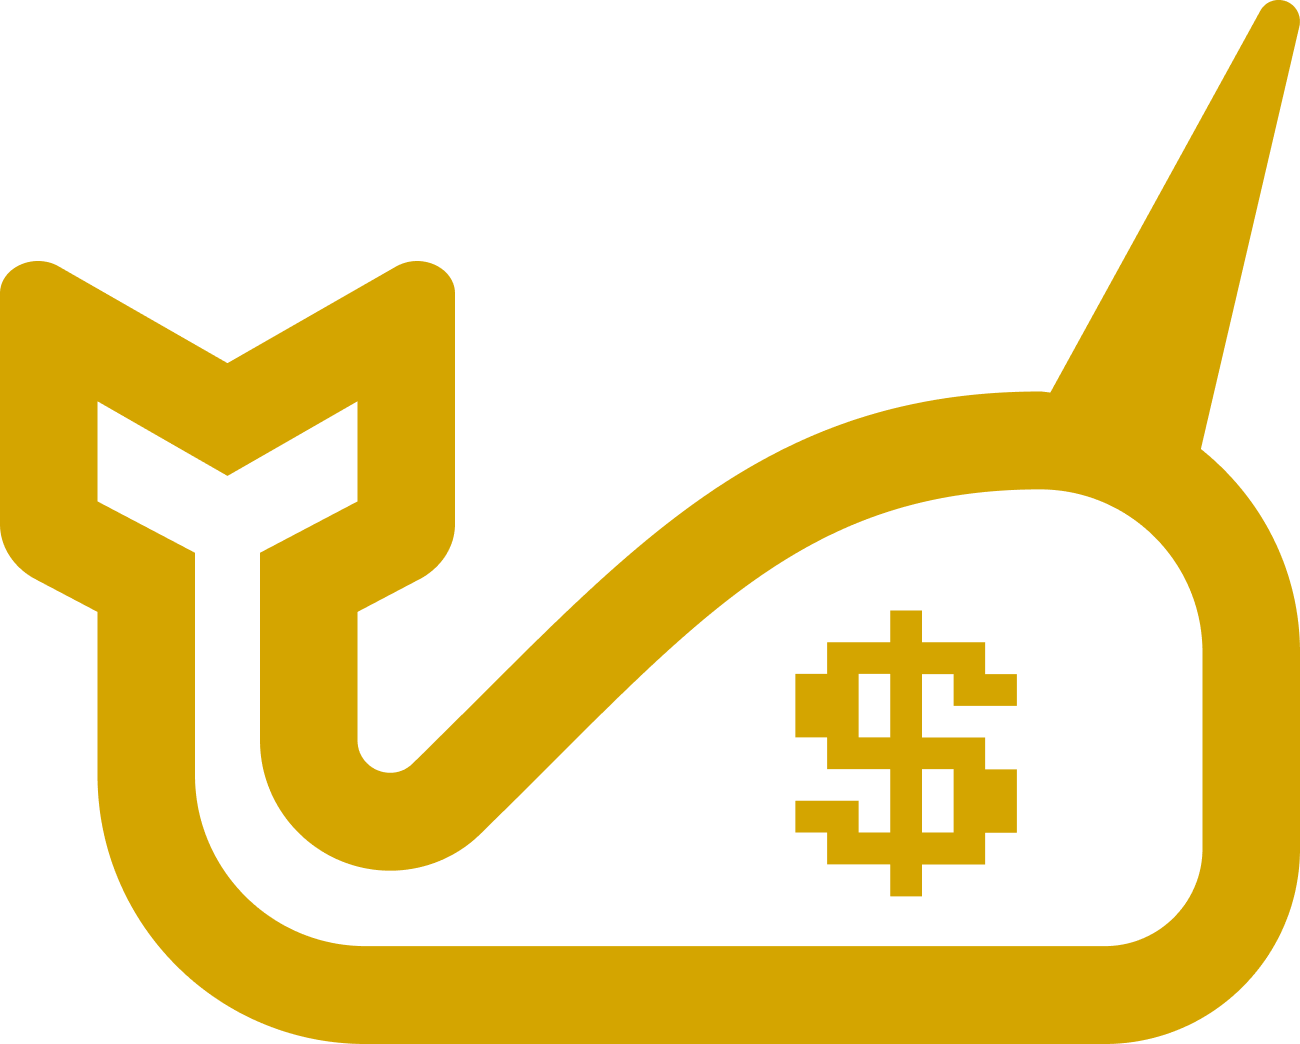 narwhal logo with dollar sign